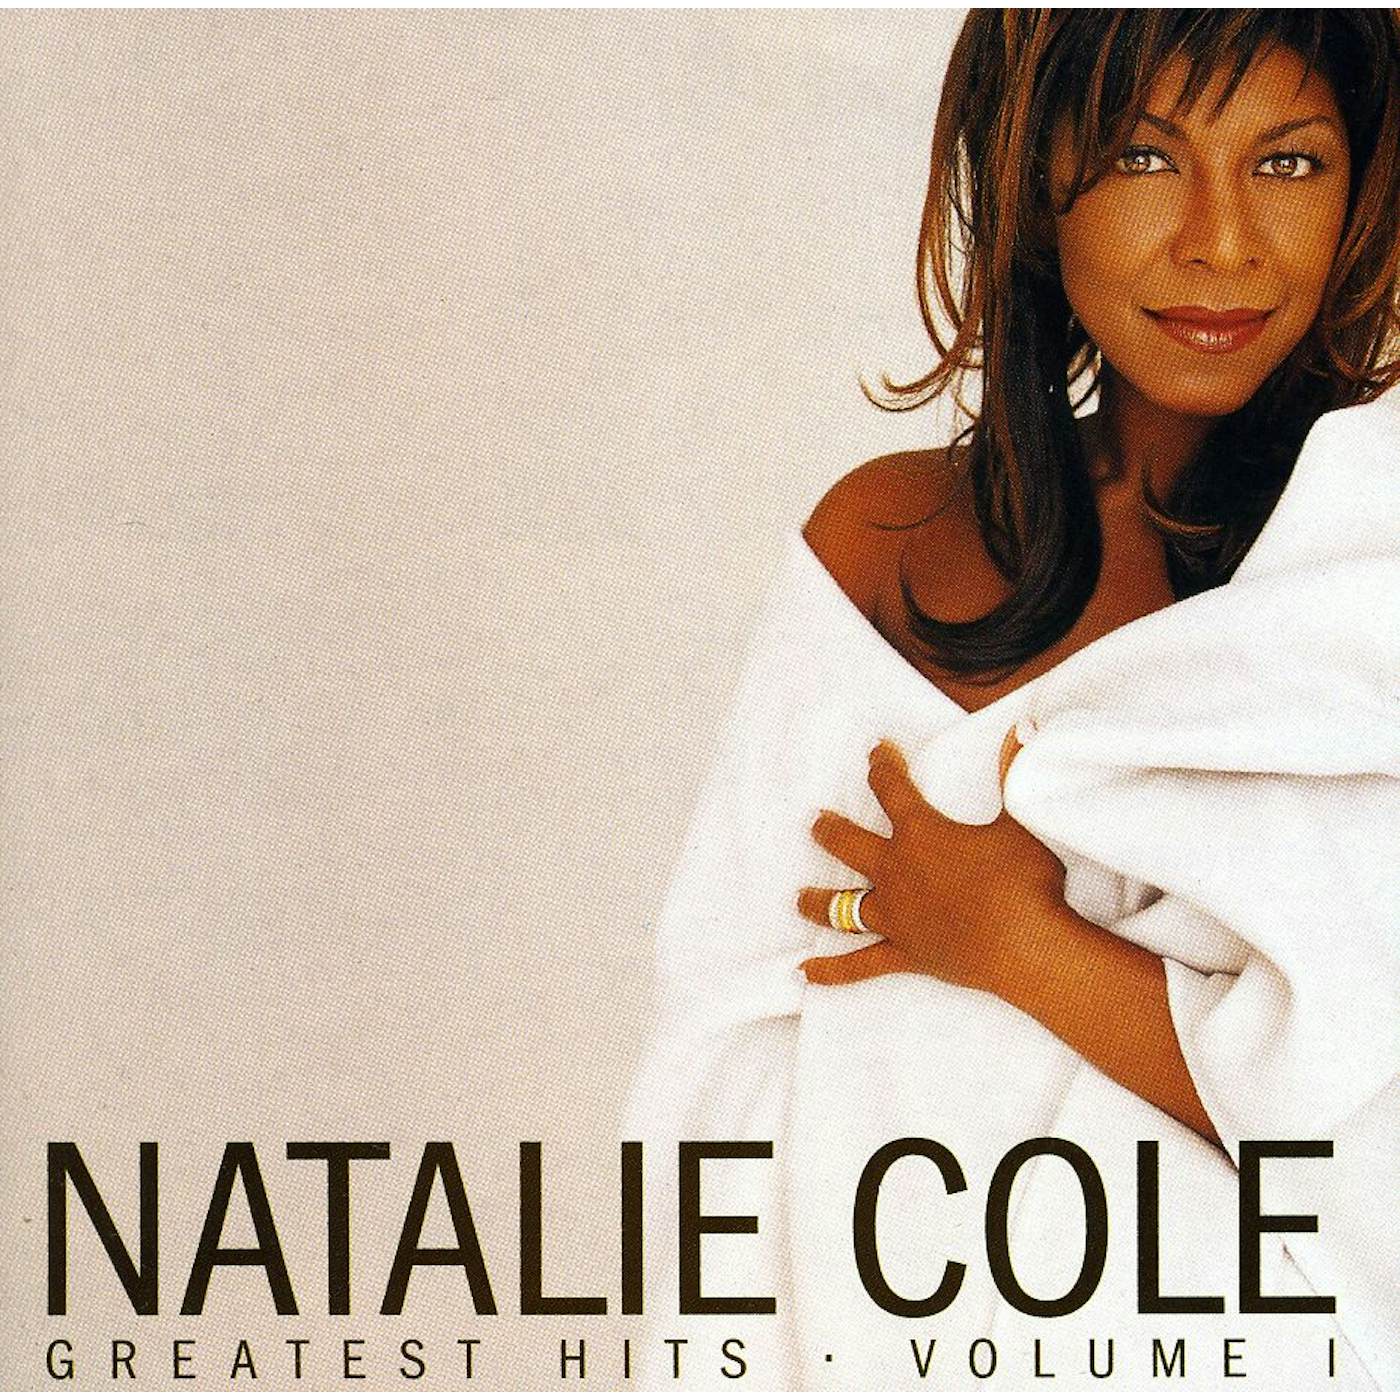 NATALIE COLE: GREATEST HITS 1 CD